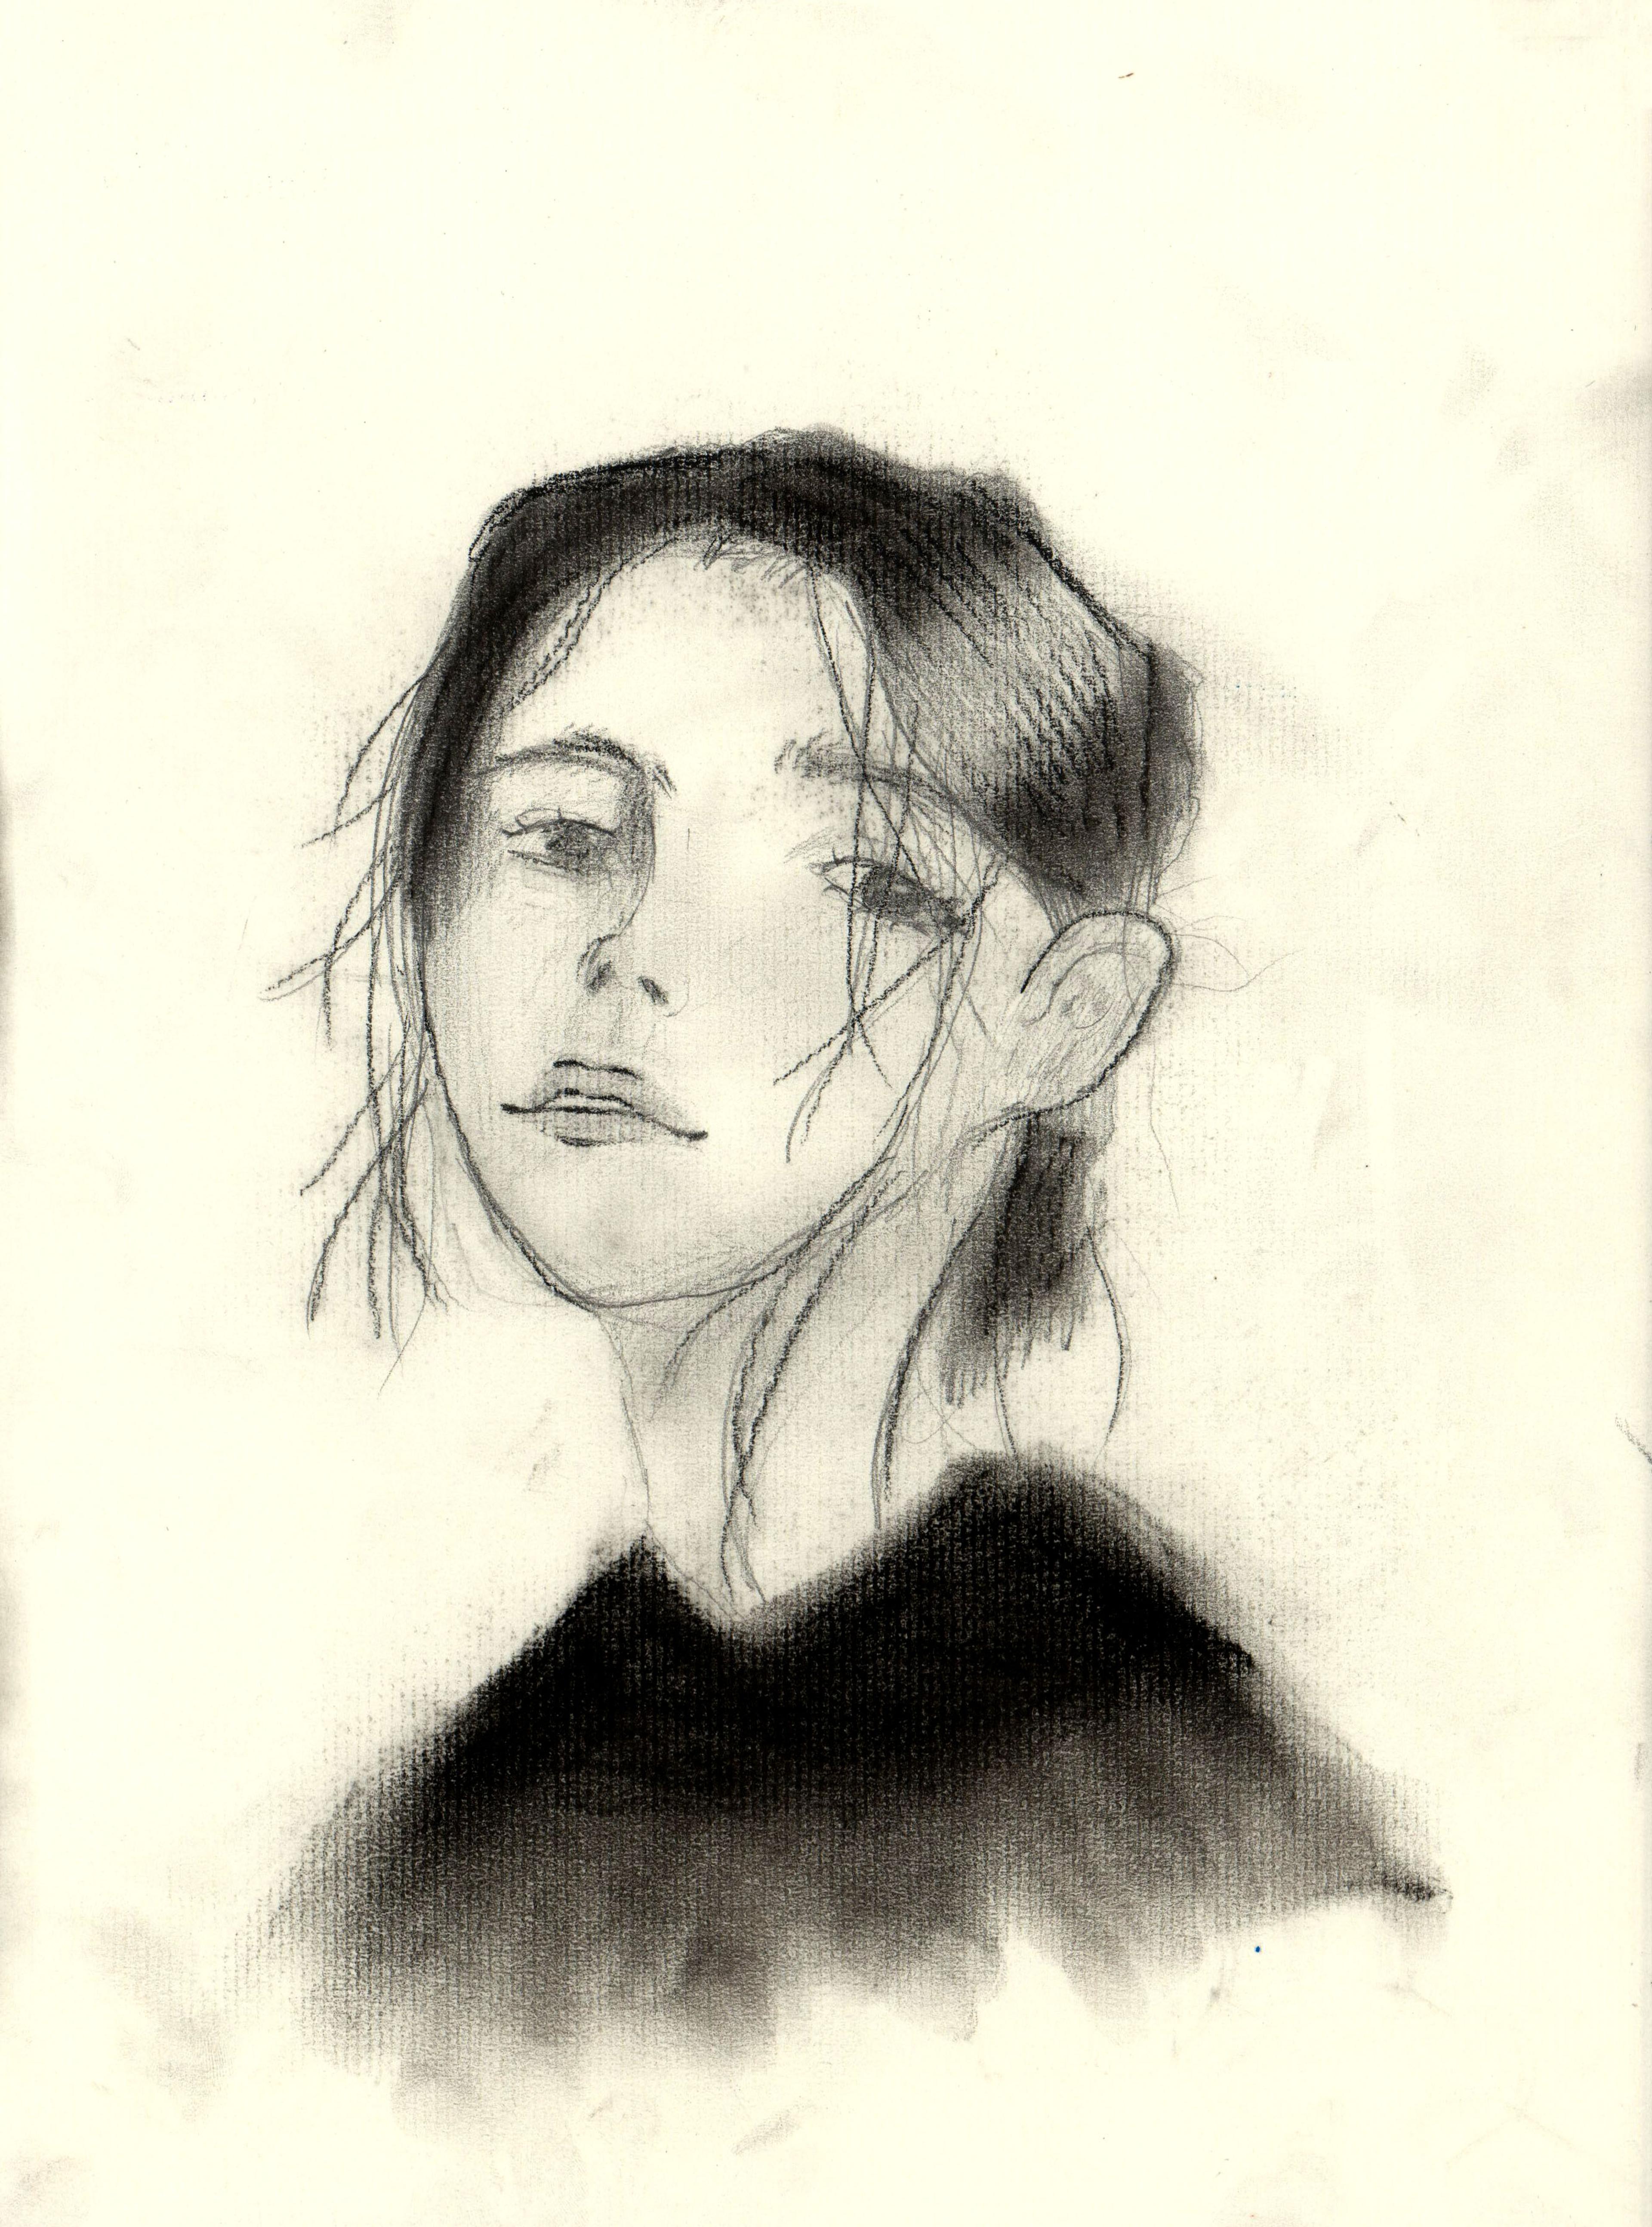 Charcoal-and–graphite pencil portrait of a young girl facing slightly to the left and looking at the viewer. She has dark neck-length hair that hangs loosely in strands on either side of her face. She wears a dark shirt that fades out in a vignette. Her chin and eyebrows are raised.